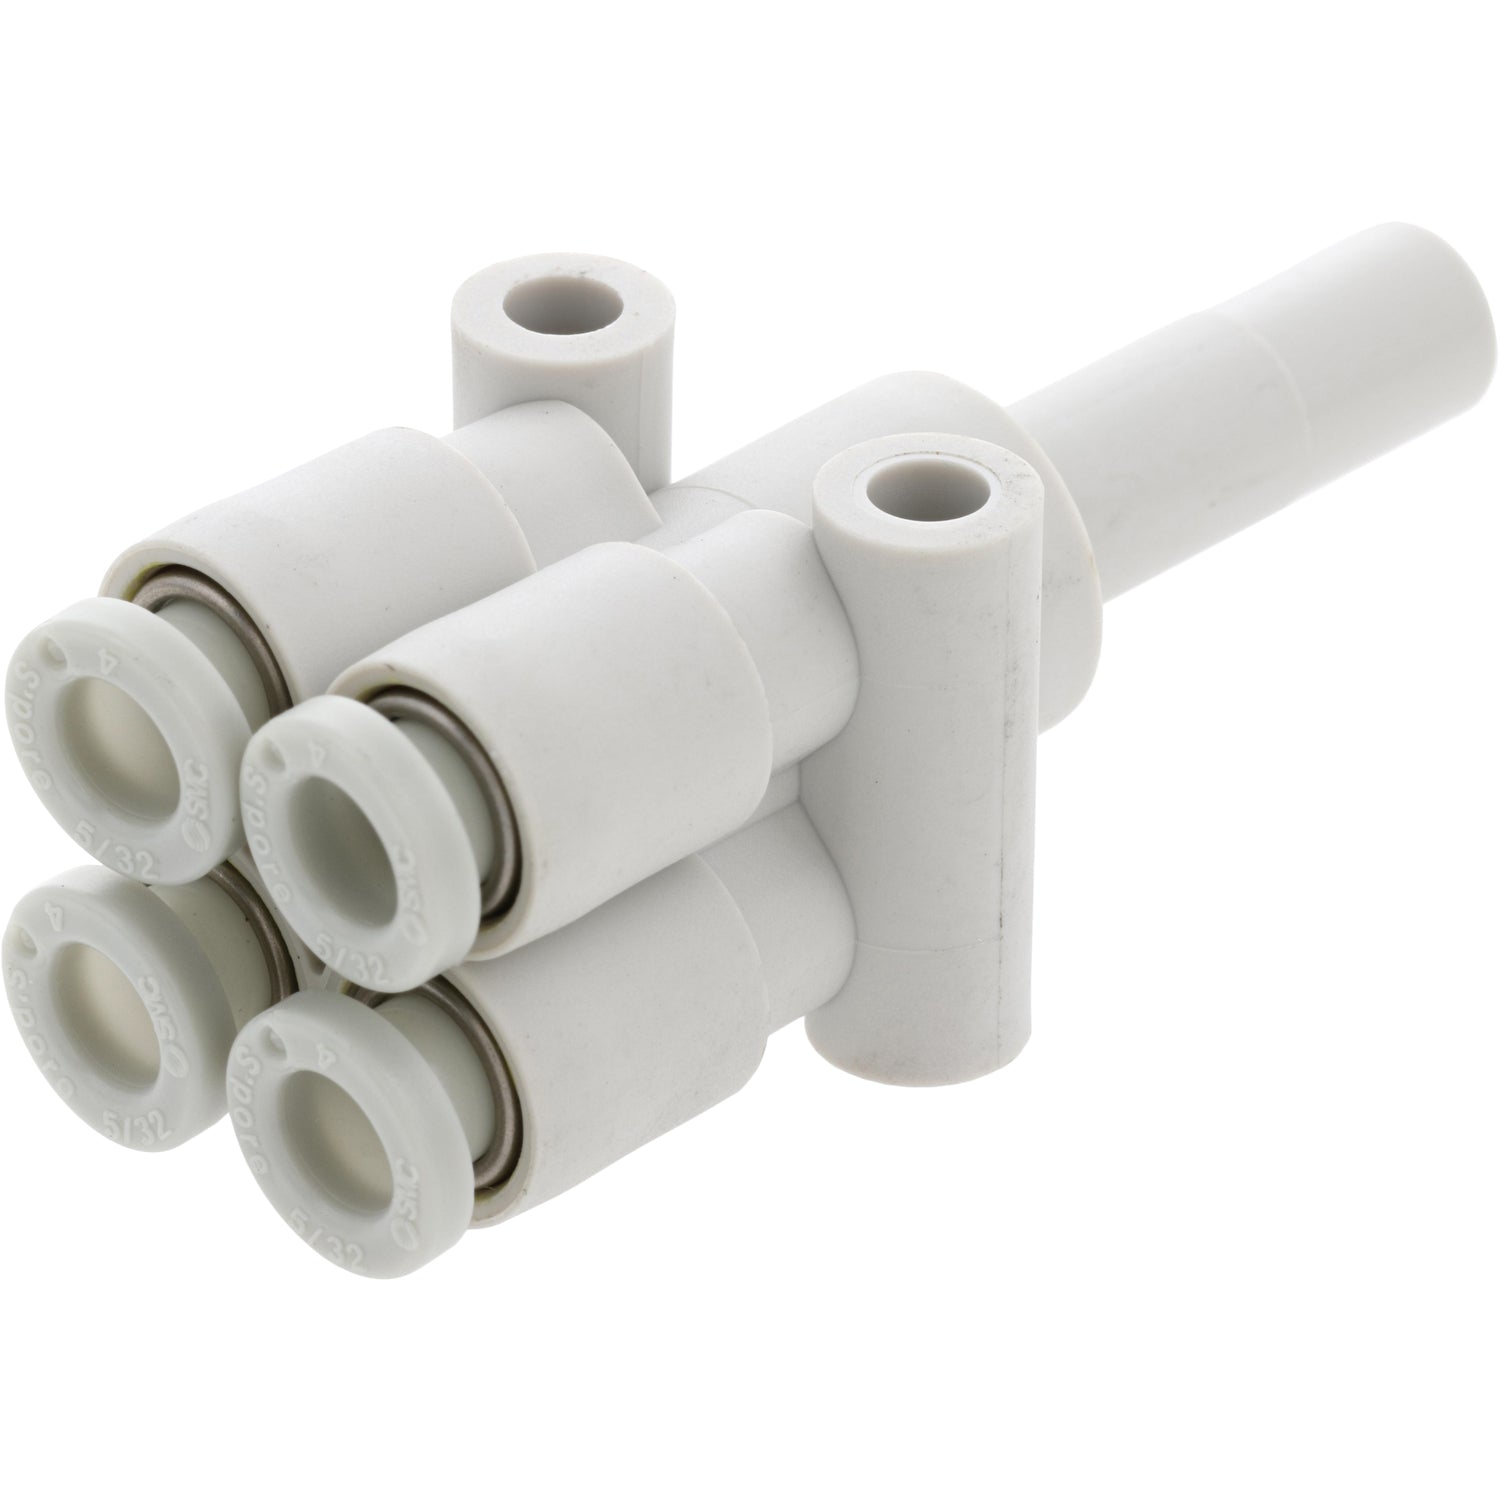 White plastic push-in quad-connector with white collars on white background.